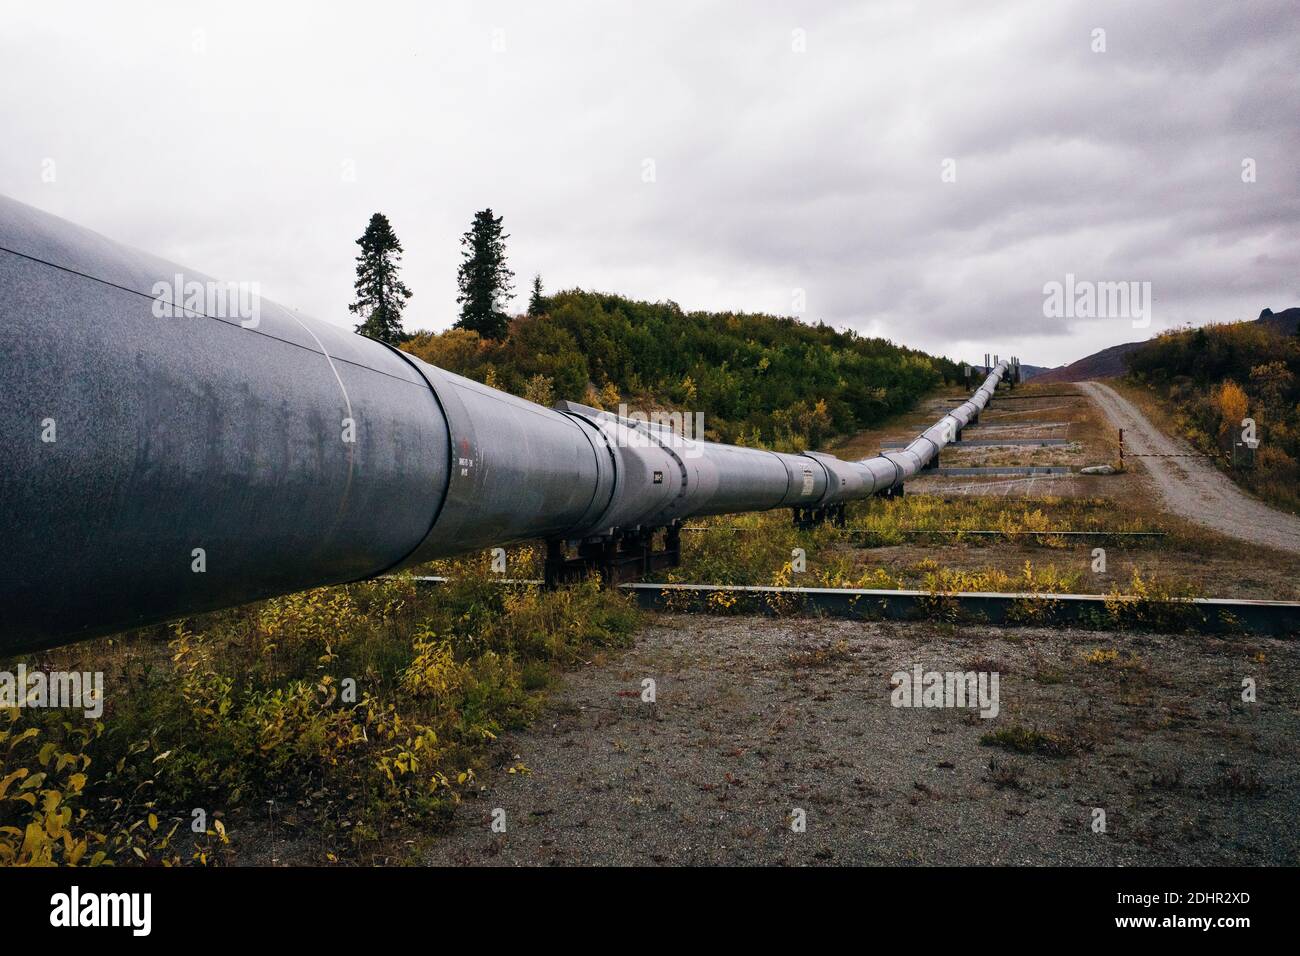 Top view of the trans-Alaska oil pipeline, emphasizing the patterns in the metal. Stock Photo